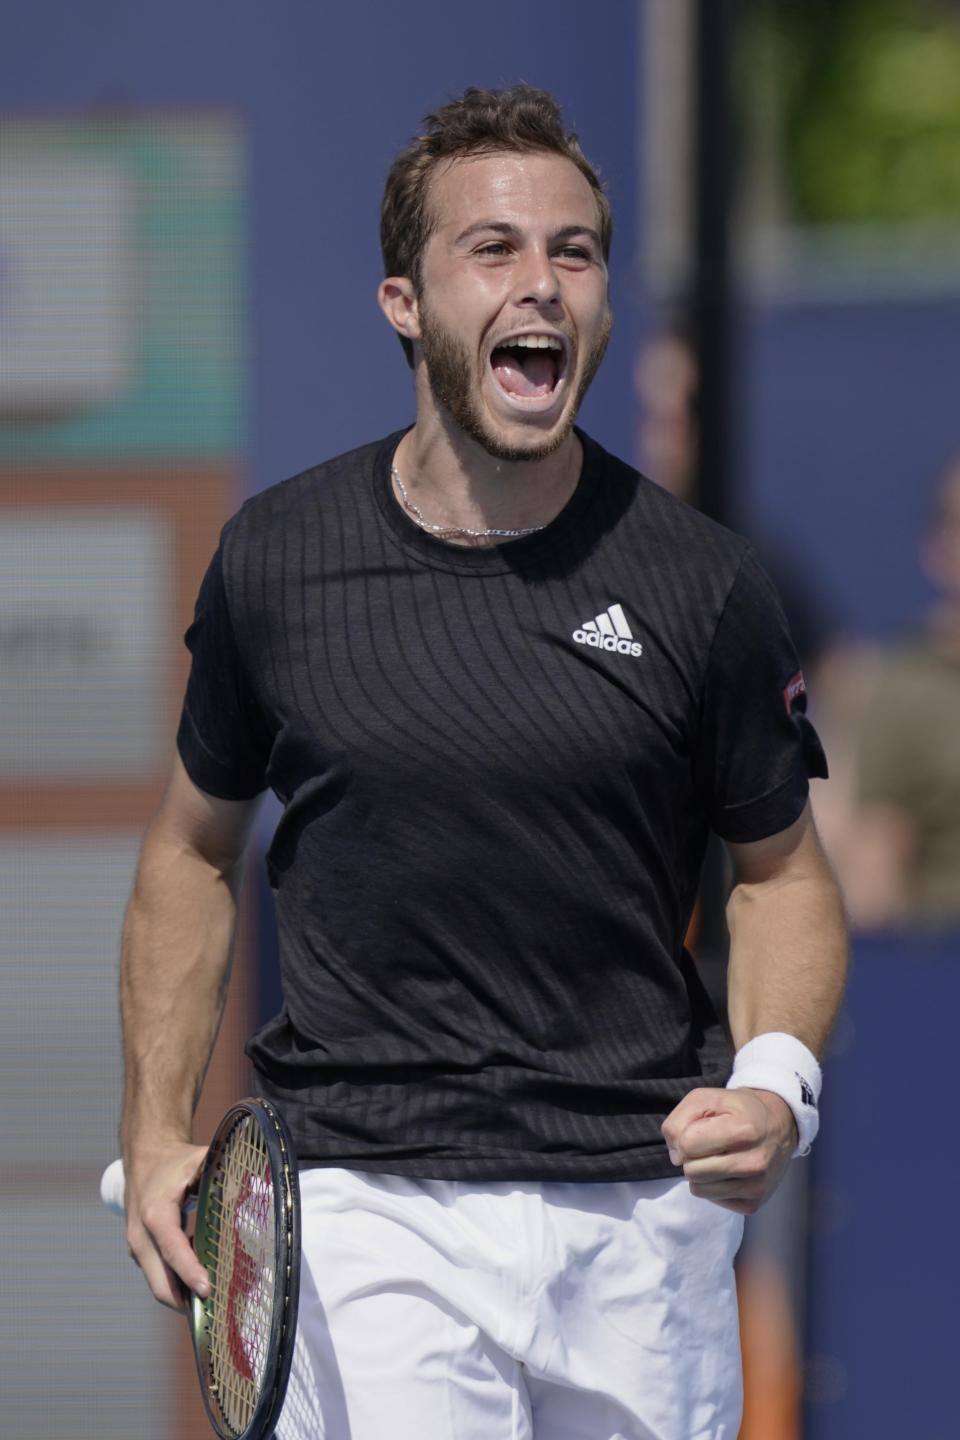 Hugo Gaston, of France, reacts after defeating John Isner, of the United States, during the Miami Open tennis tournament, Friday, March 25, 2022, in Miami Gardens, Fla. (AP Photo/Marta Lavandier)